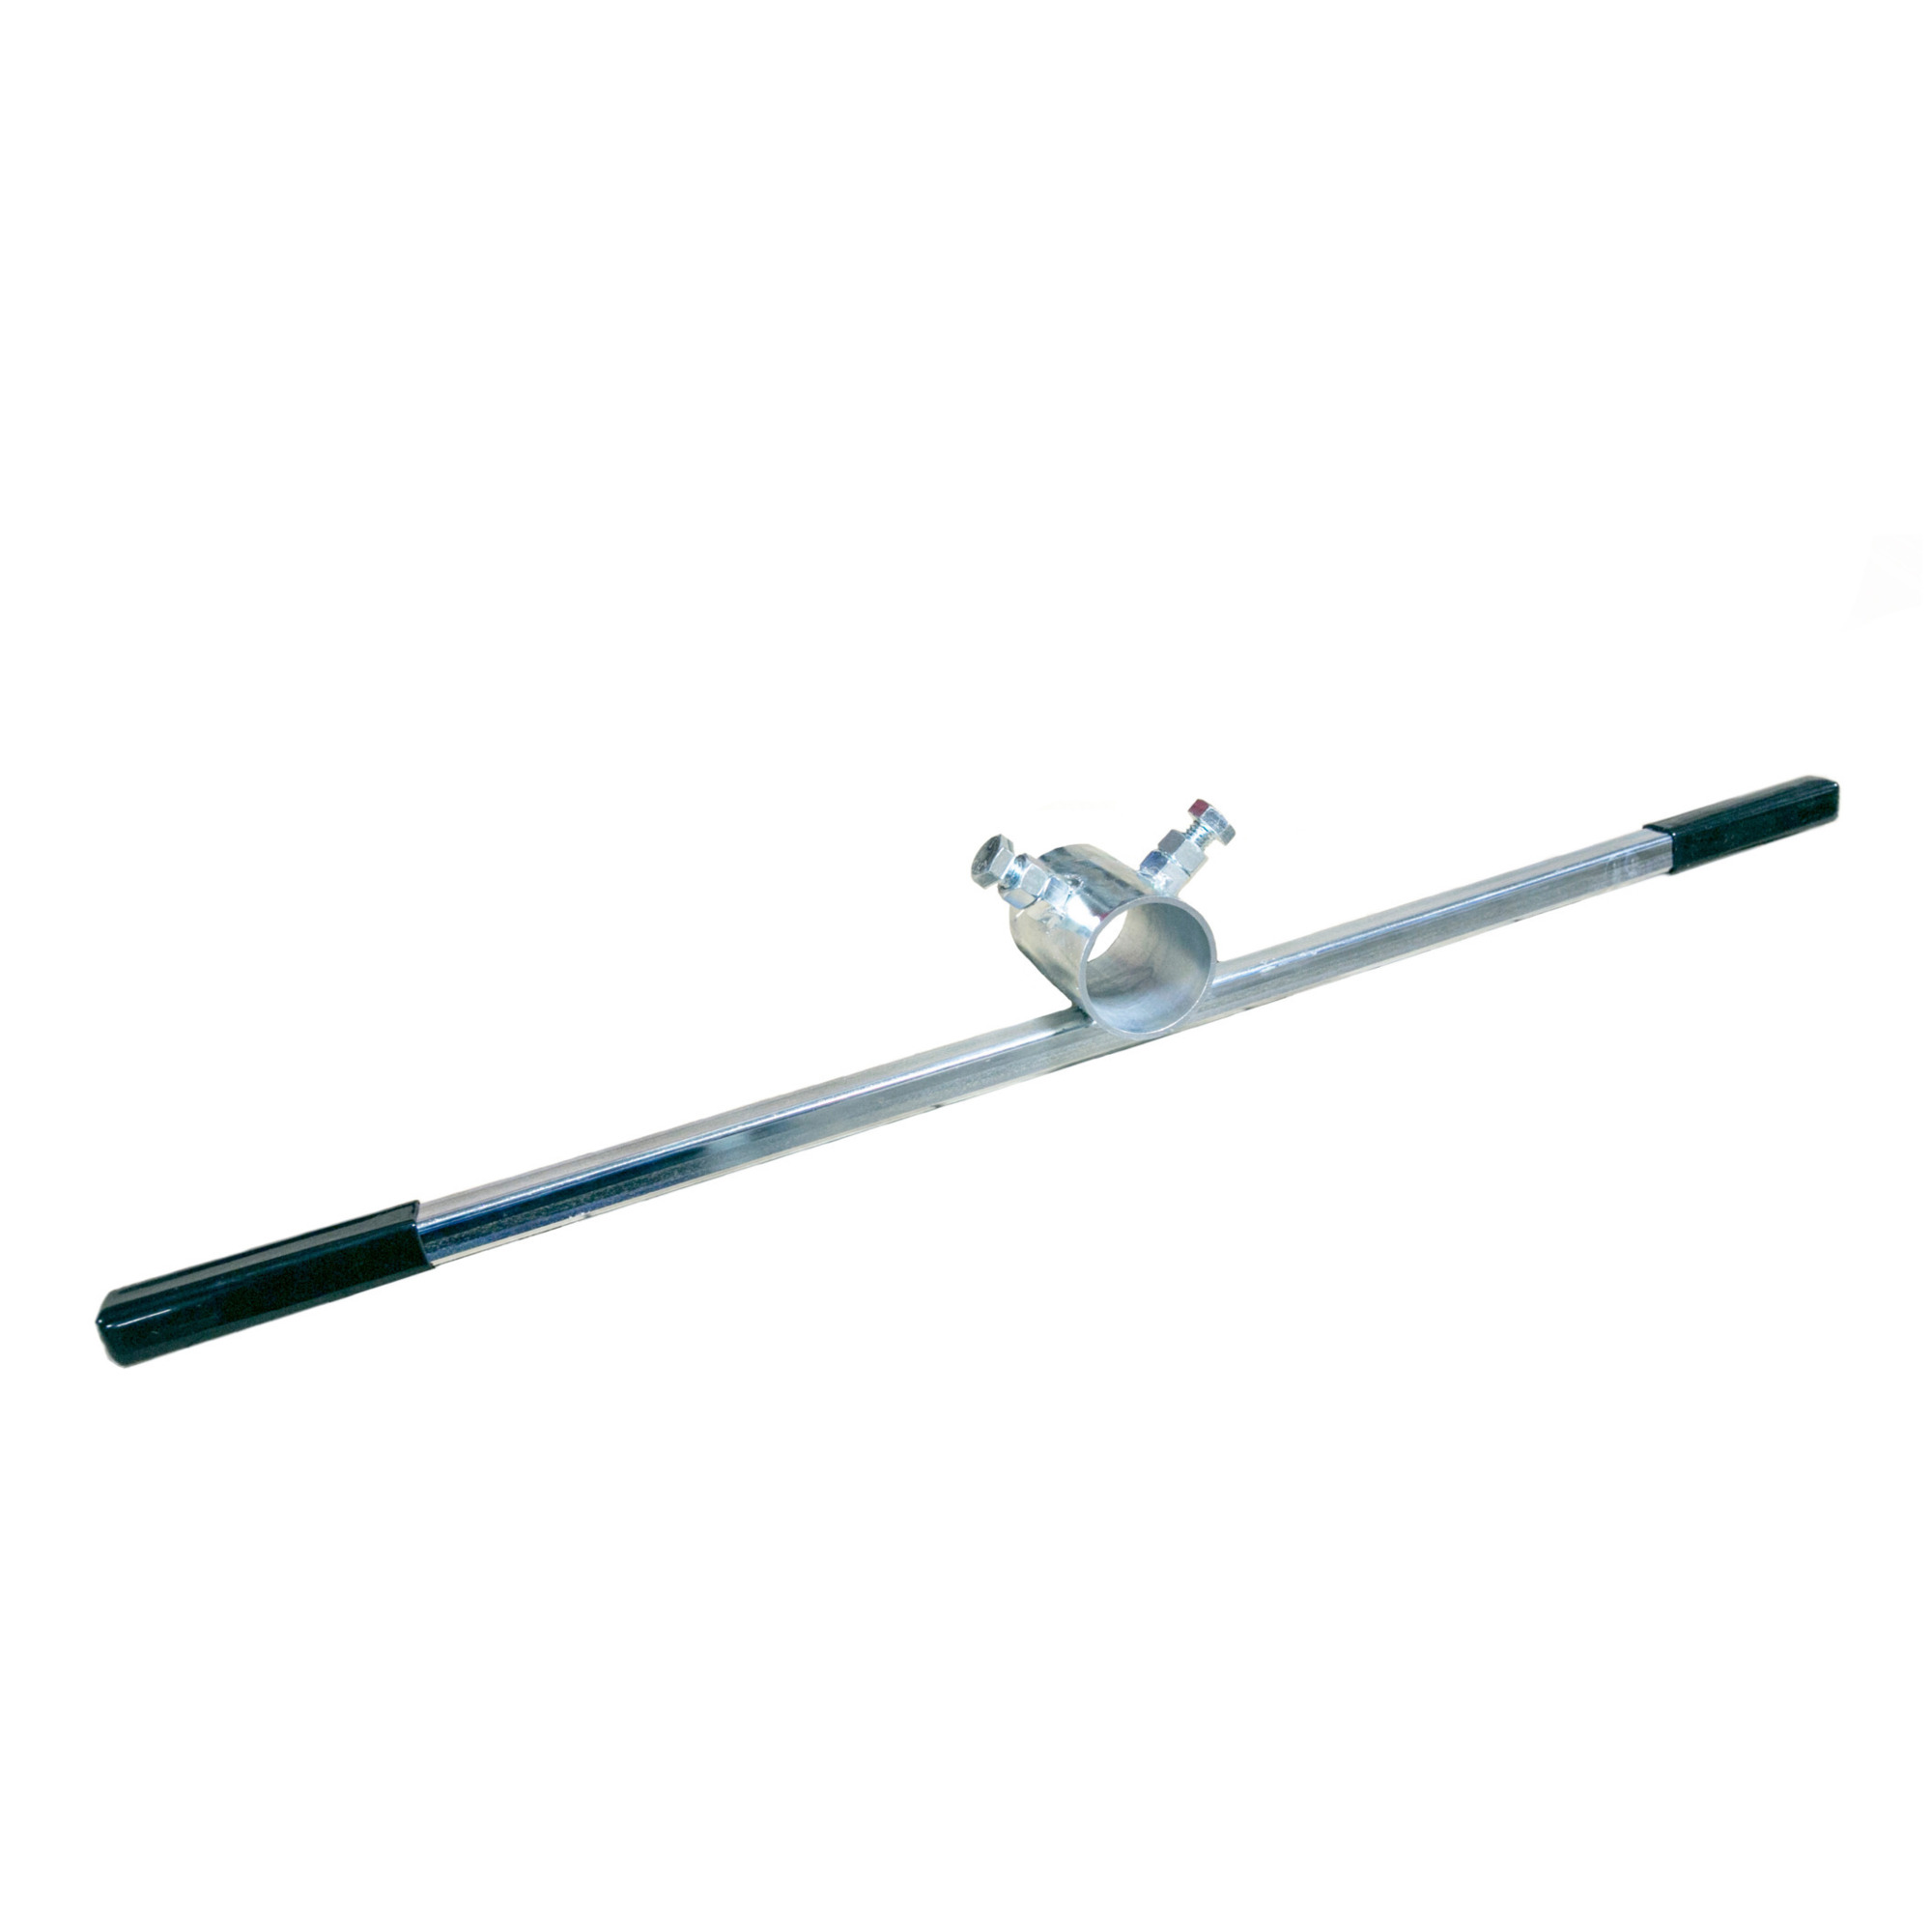 Tommy Docks, Auger Wrench, Product Type Boat Lift, Length 4.5 in, Width 36.5 in, Model TD-10085